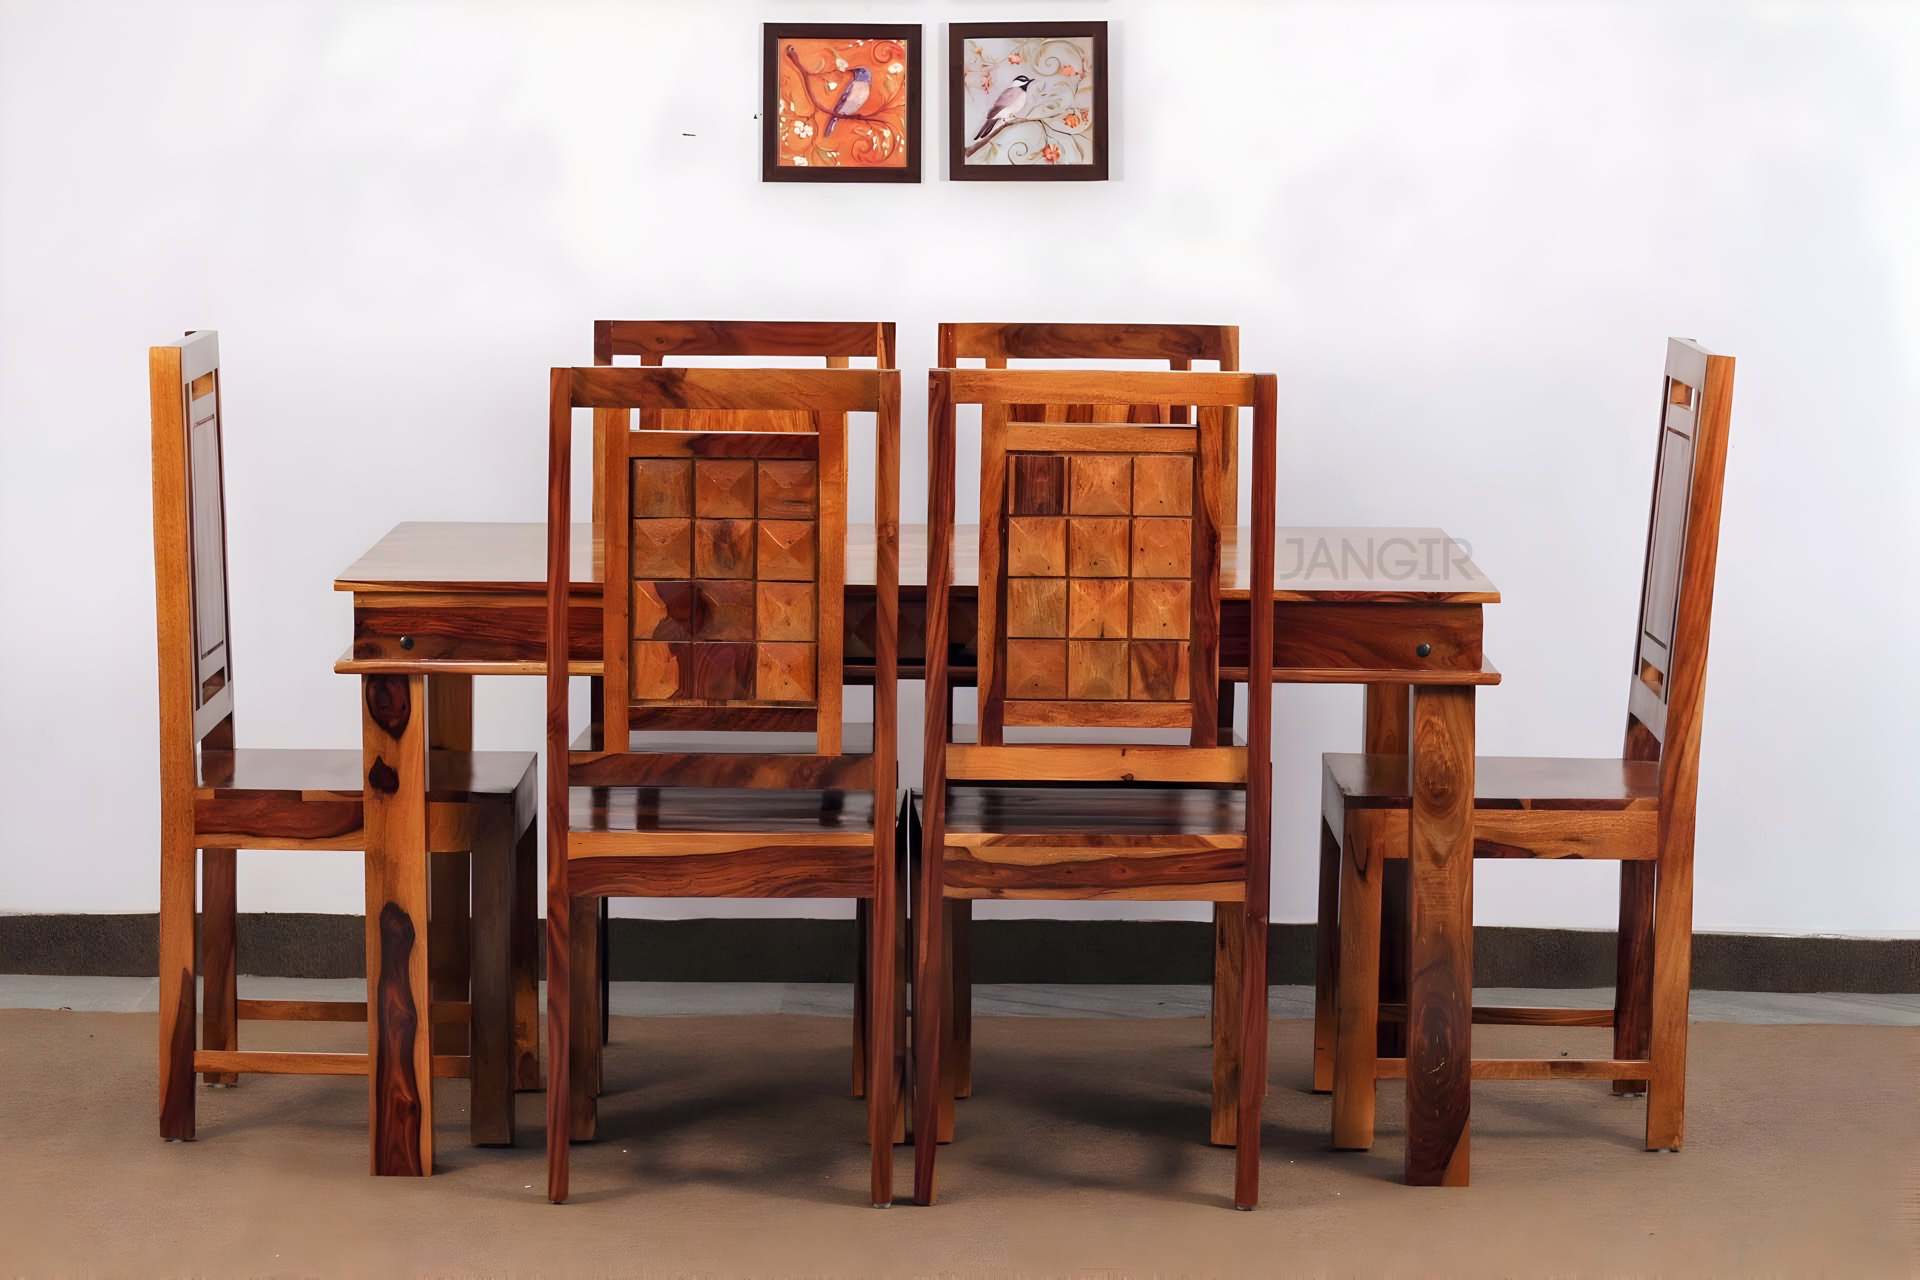 Enhance the elegance of your dining space with a six and four seater wooden dining table and chairs made with sheesham wood, combination that exudes timeless style and sophistication. Shop now